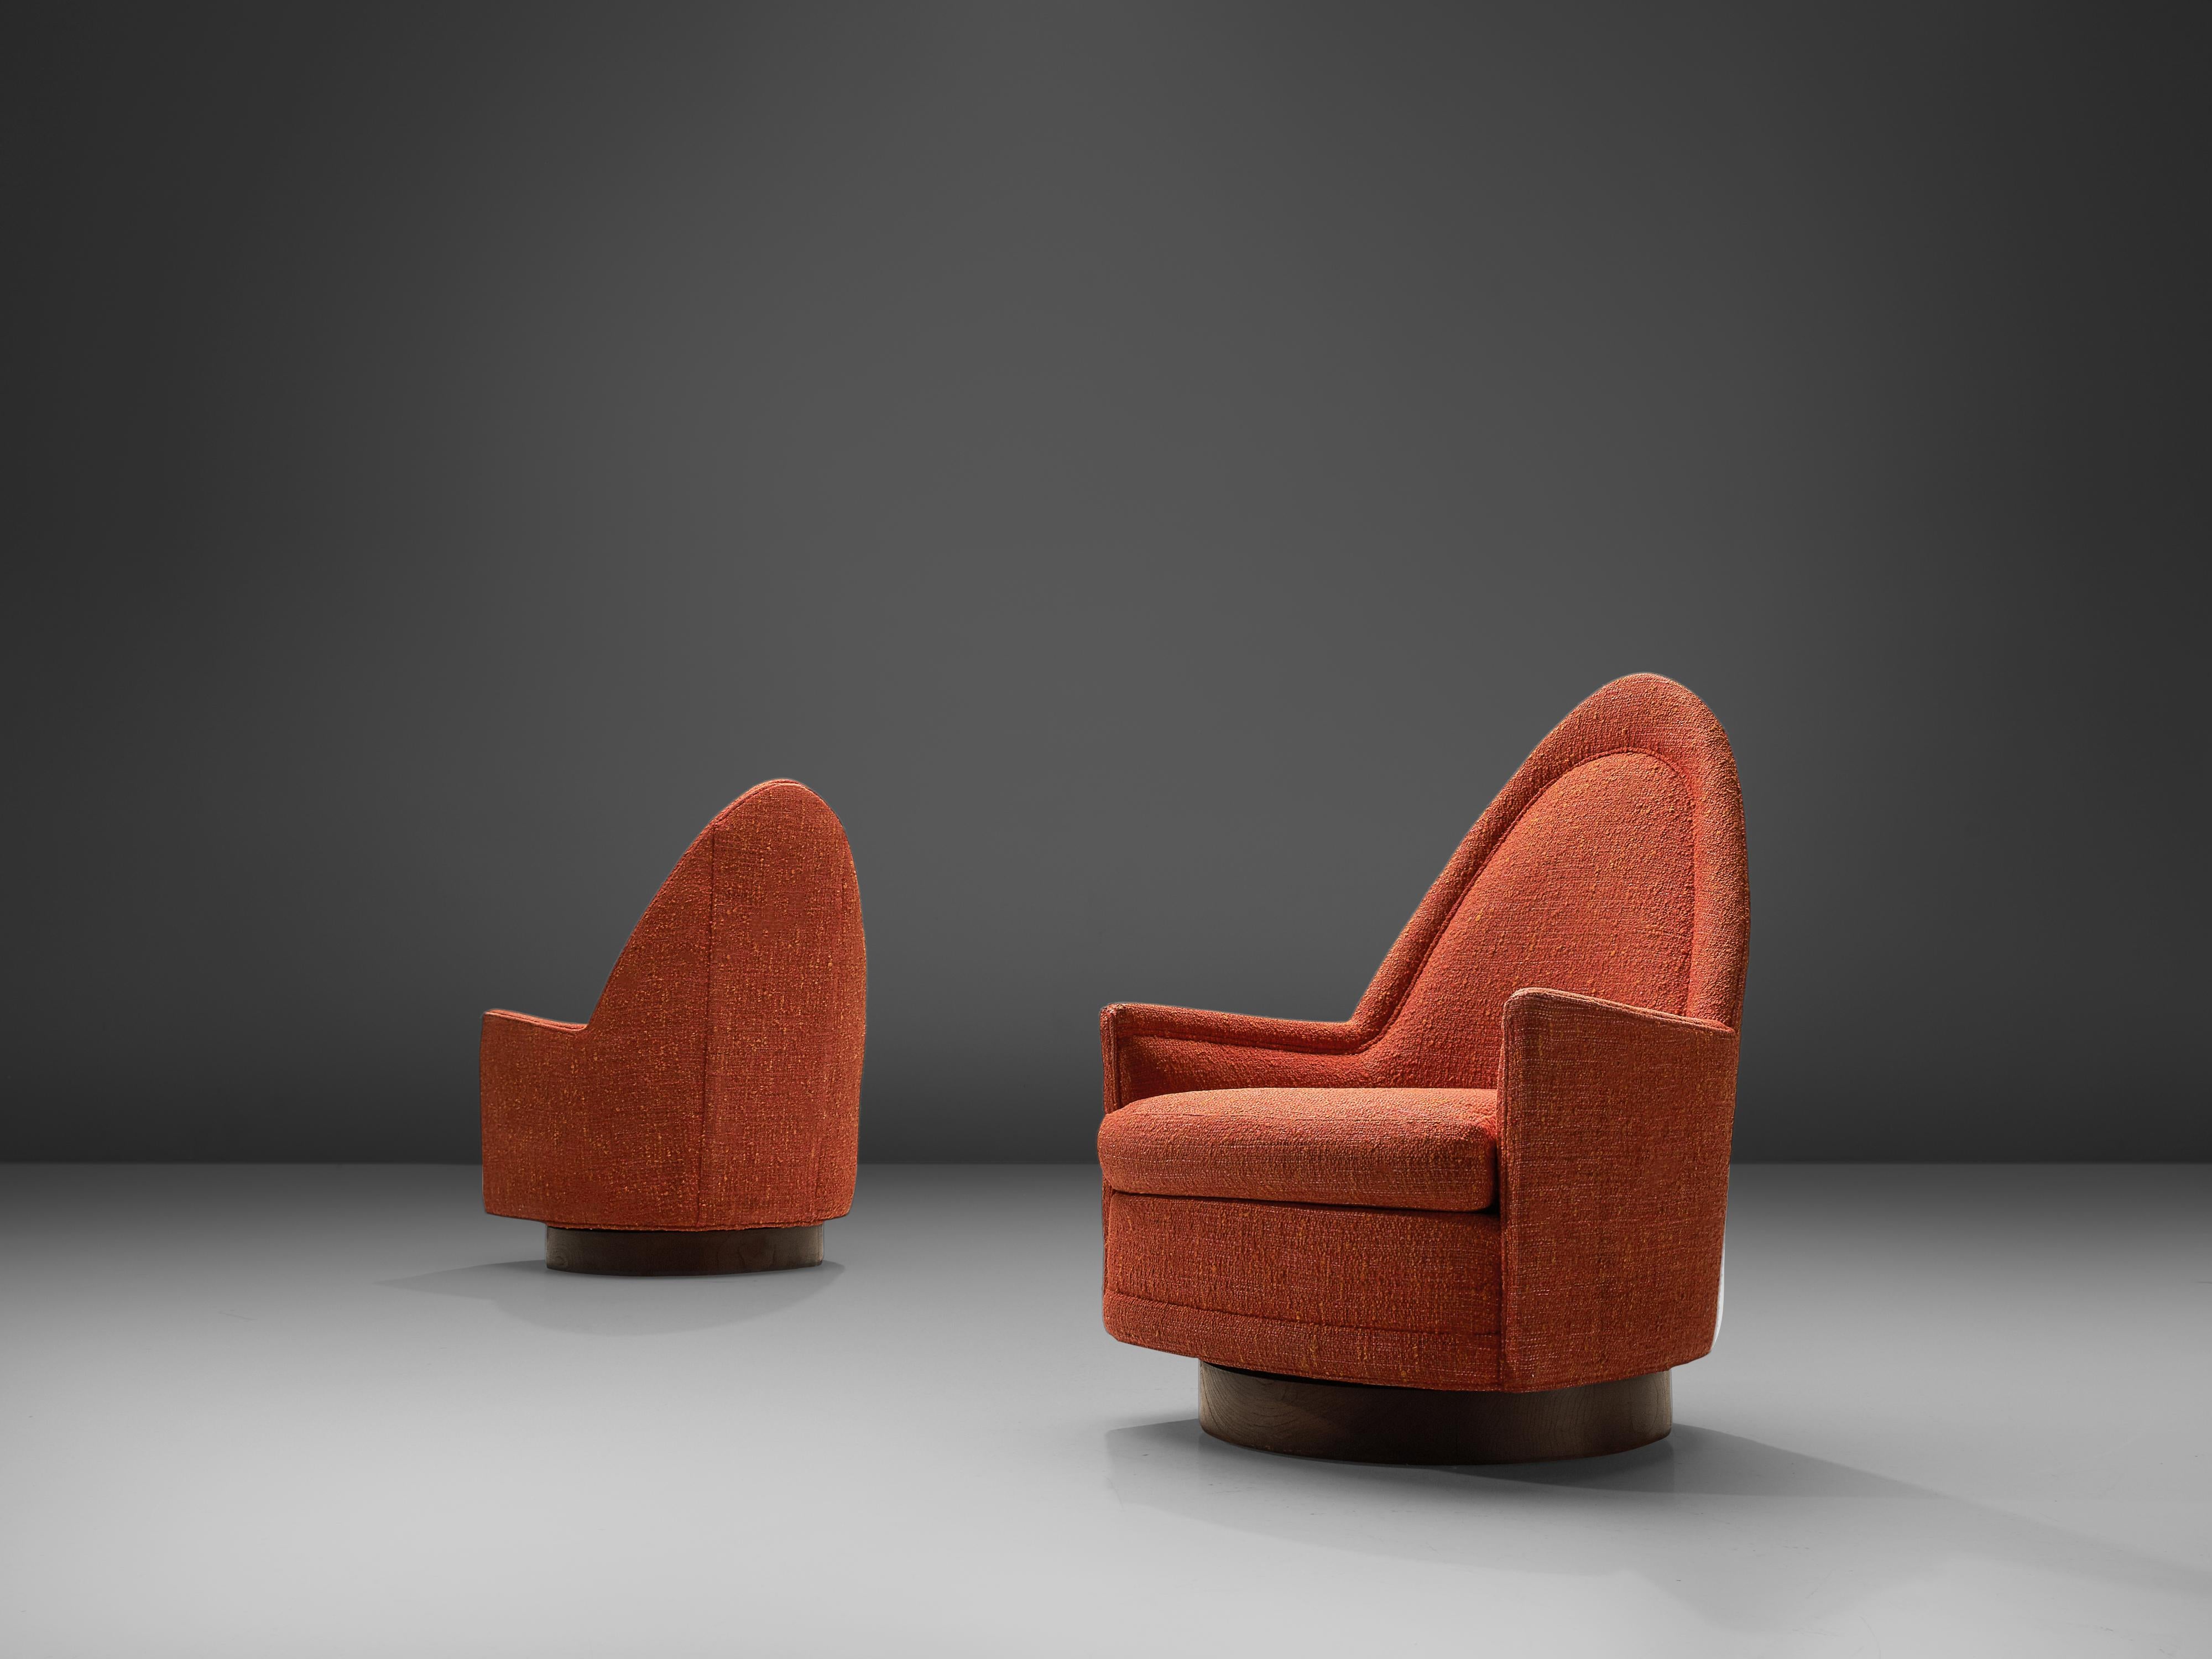 Selig, pair of swivel chairs, red fabric, wood, United States, 1960s

The combination of the high, drop-like pointy back and the straight front gives these chairs both a simplistic modern touch combined with outspoken elements. The chairs both have